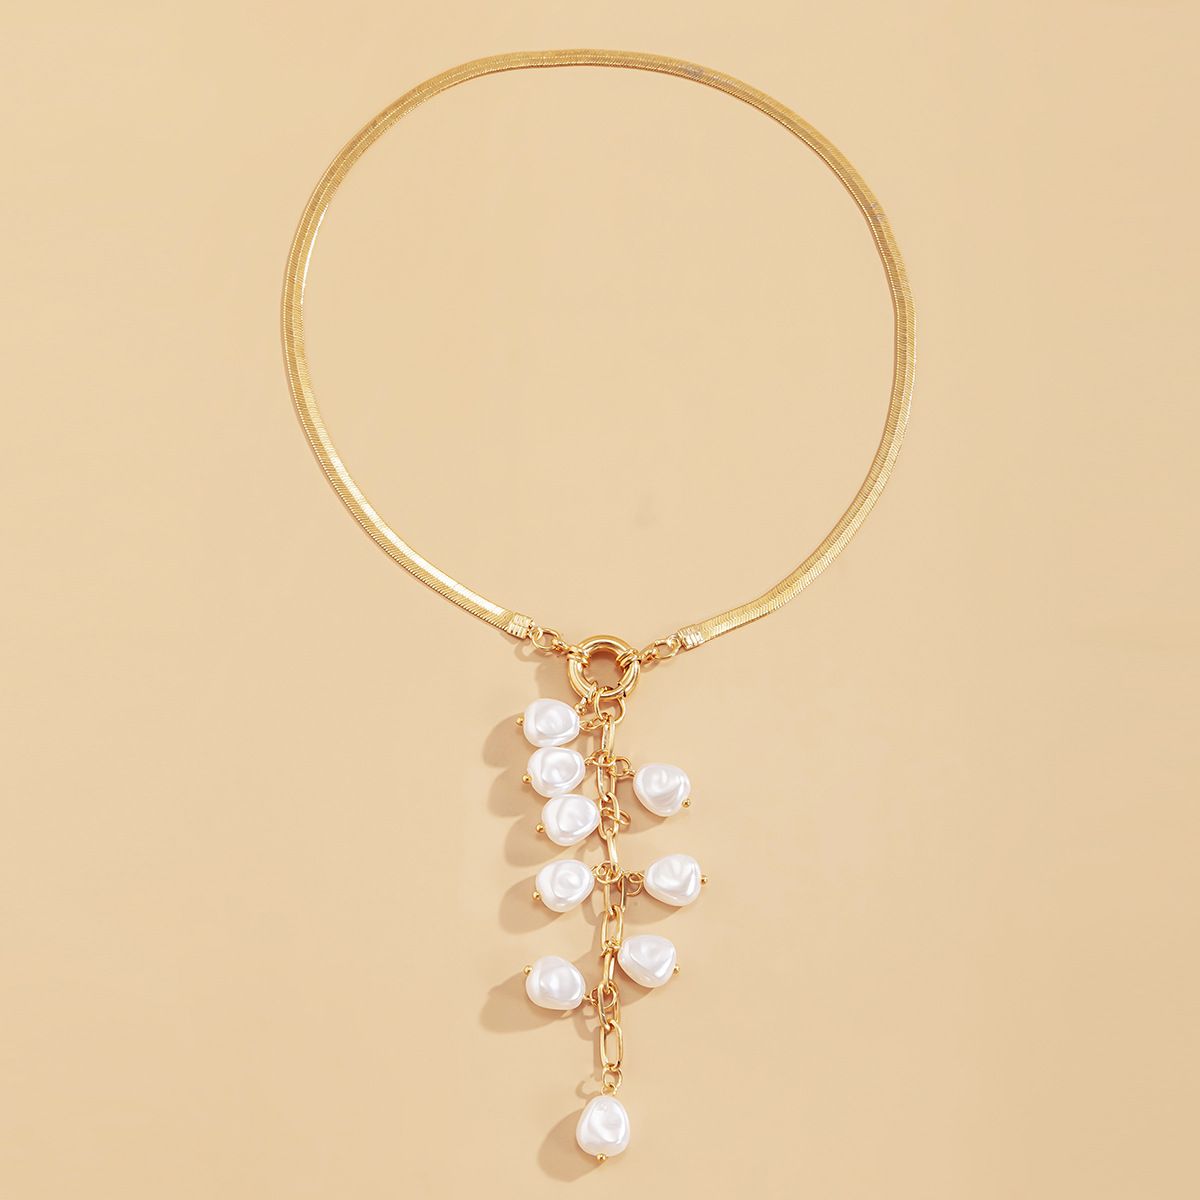 Product of the day :
Imitation and retro baroque pearl necklace
achete.online/en/product/?p=…
#Accessories #Accessoriesforwomen #Allcategories #Jewelry #Necklacesforwomen #Vintage #Women #pearls #shopping #buyonline #sale #acheteonline